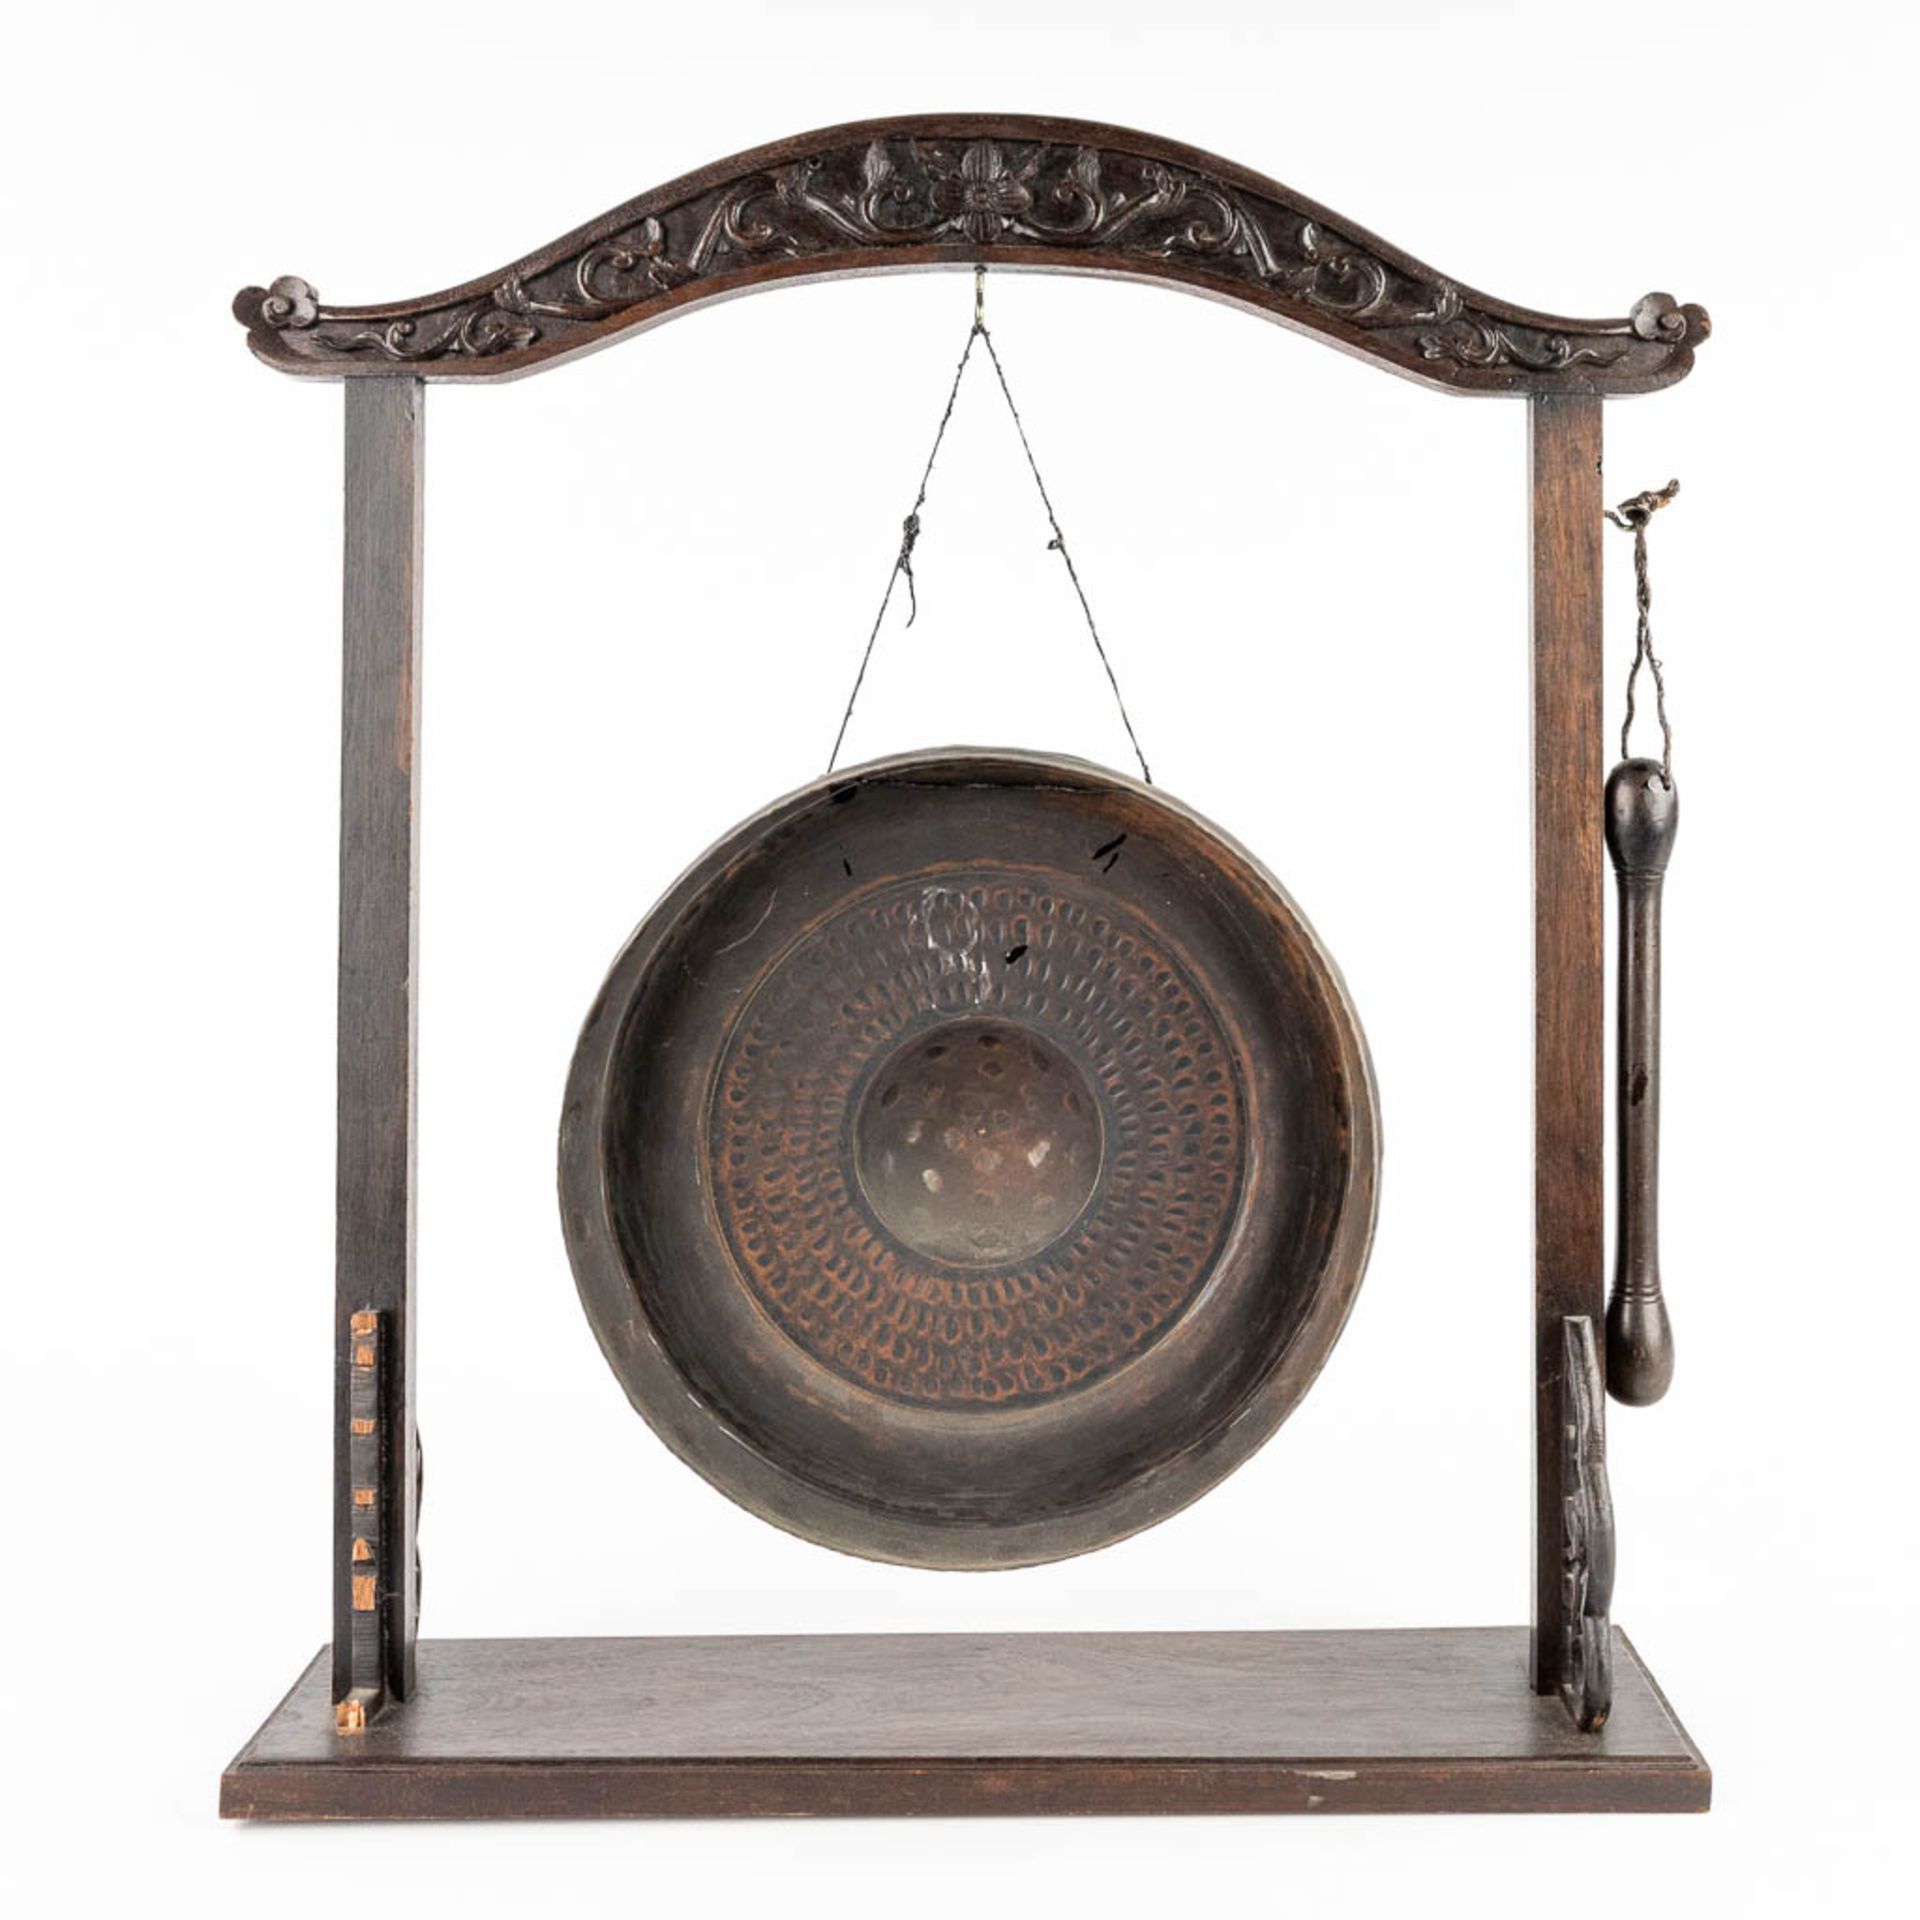 3 bells and a gong, Oriental. 19th/20th C. (L:13 x W:47 x H:55 cm) - Image 7 of 28